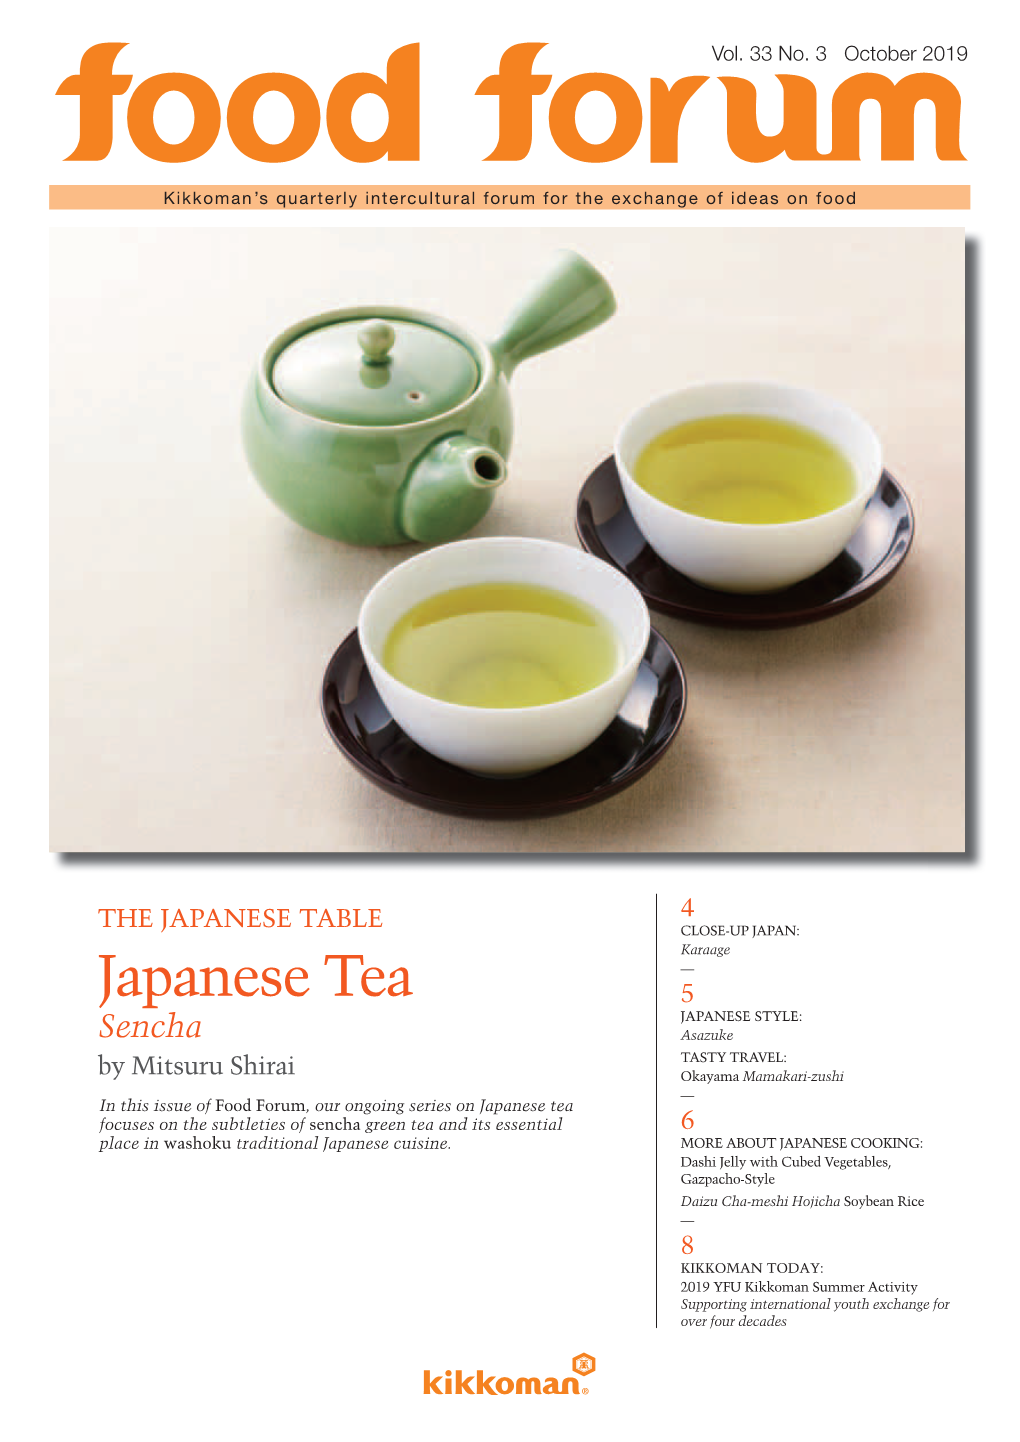 Food Forum, Our Ongoing Series on Japanese Tea Focuses on the Subtleties of Sencha Green Tea and Its Essential 6 Place in Washoku Traditional Japanese Cuisine